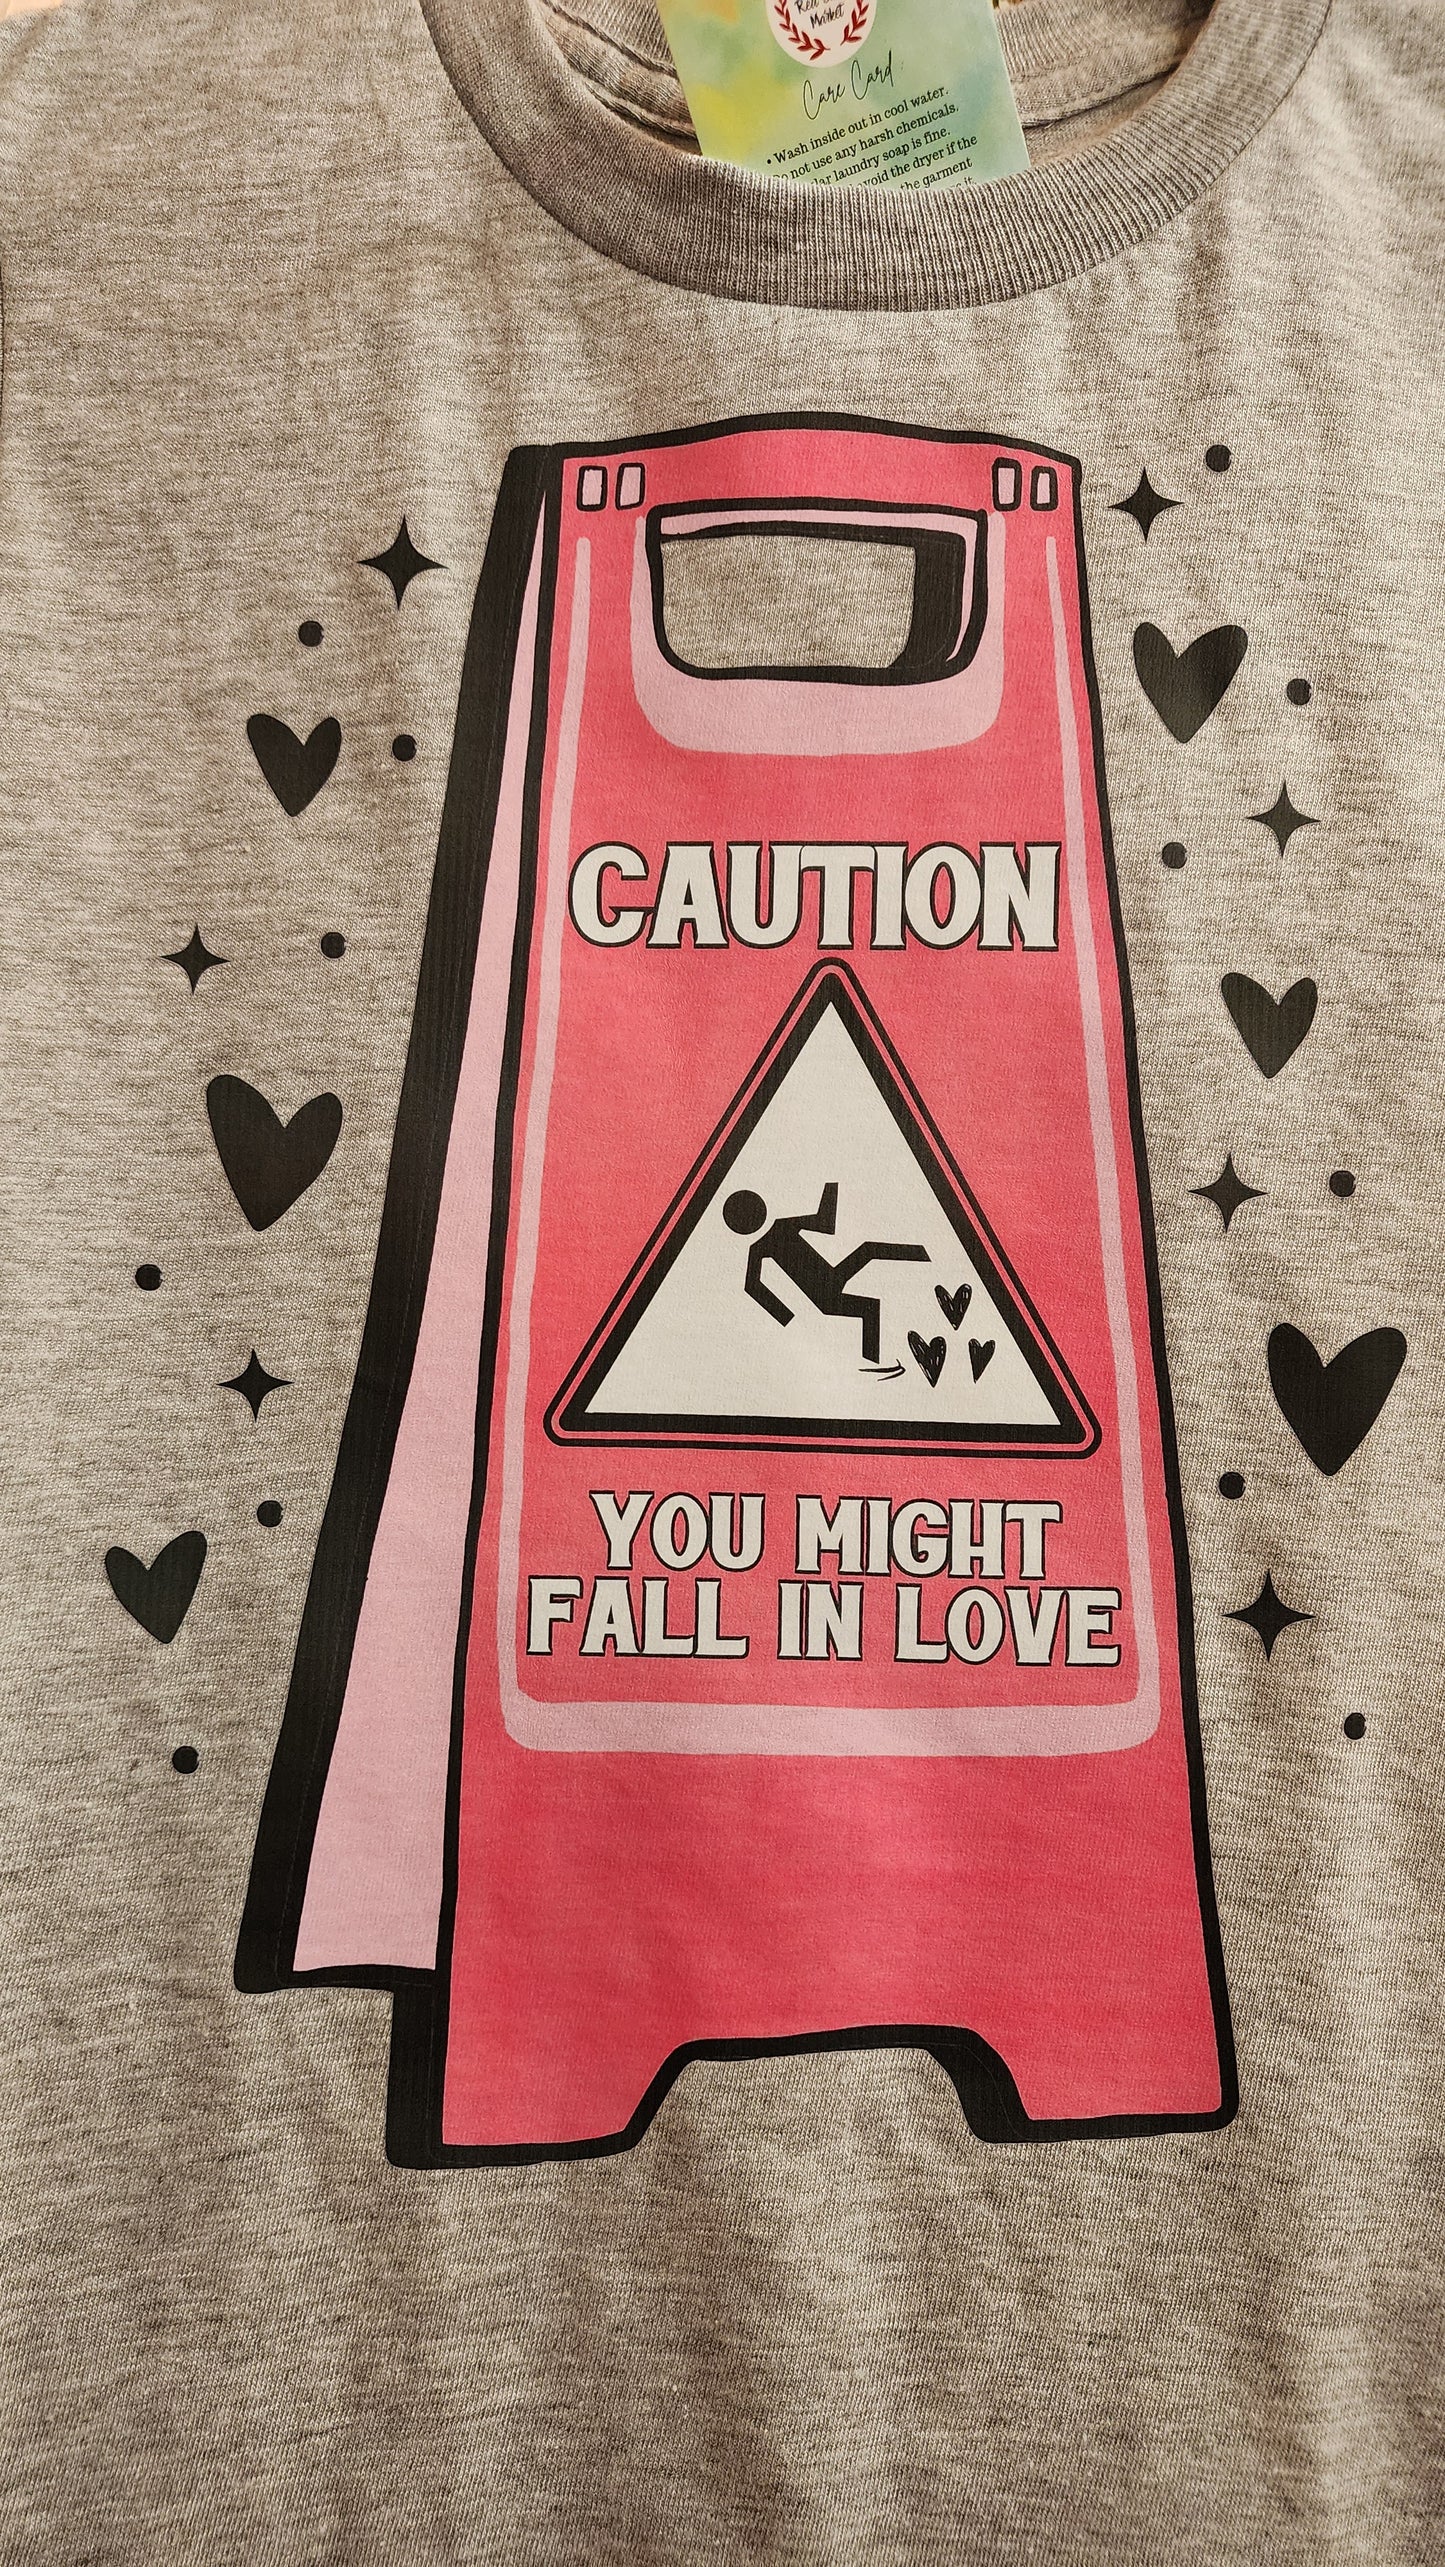 Caution You Might Fall In Love kids tee